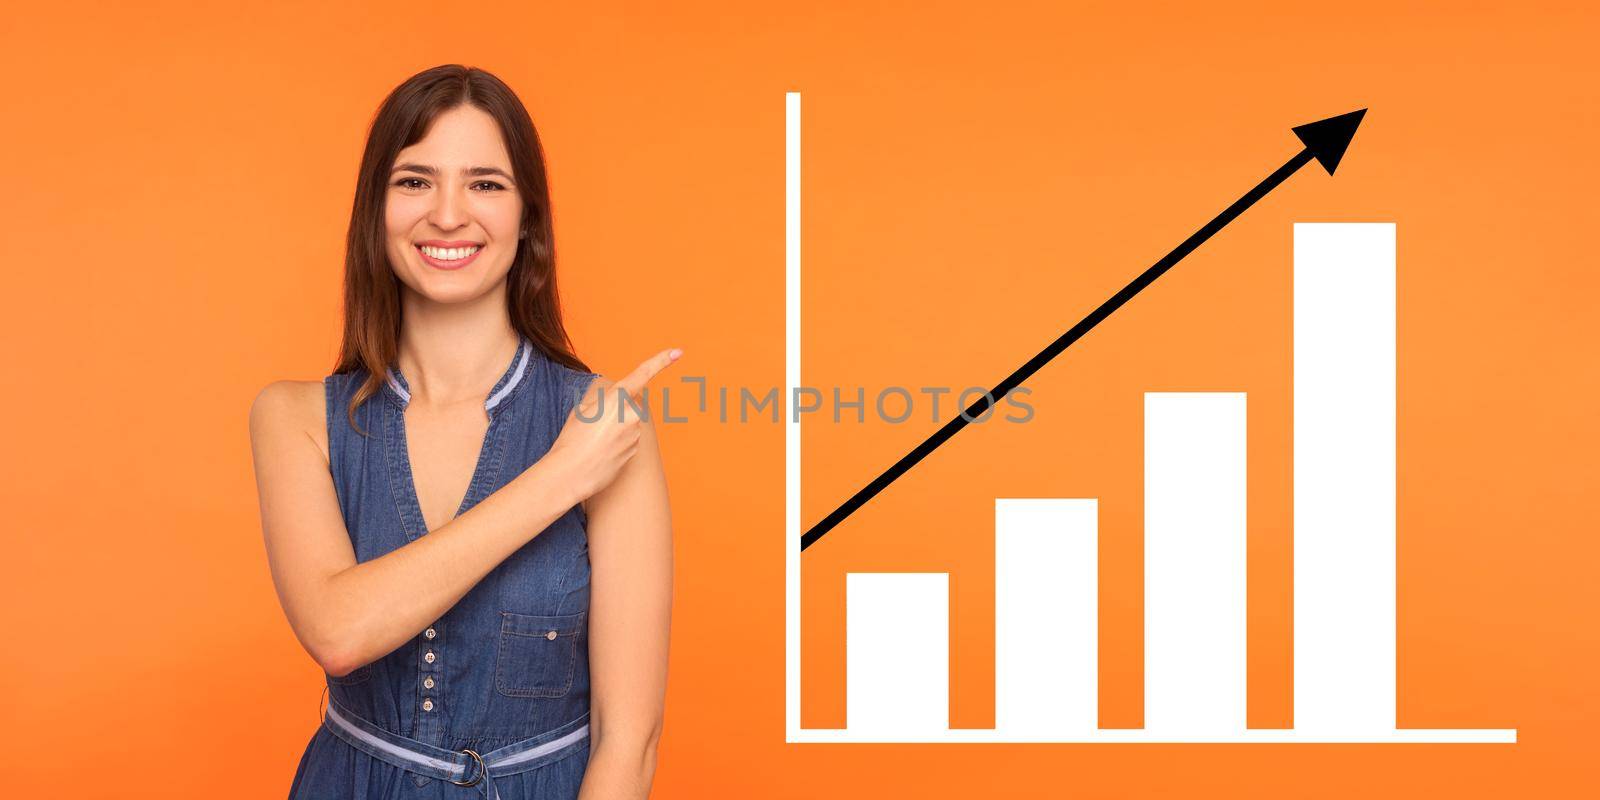 Portrait of happy joyful young woman standing, pointing aside and showing business growth graph. indoor studio shot isolated on orange background